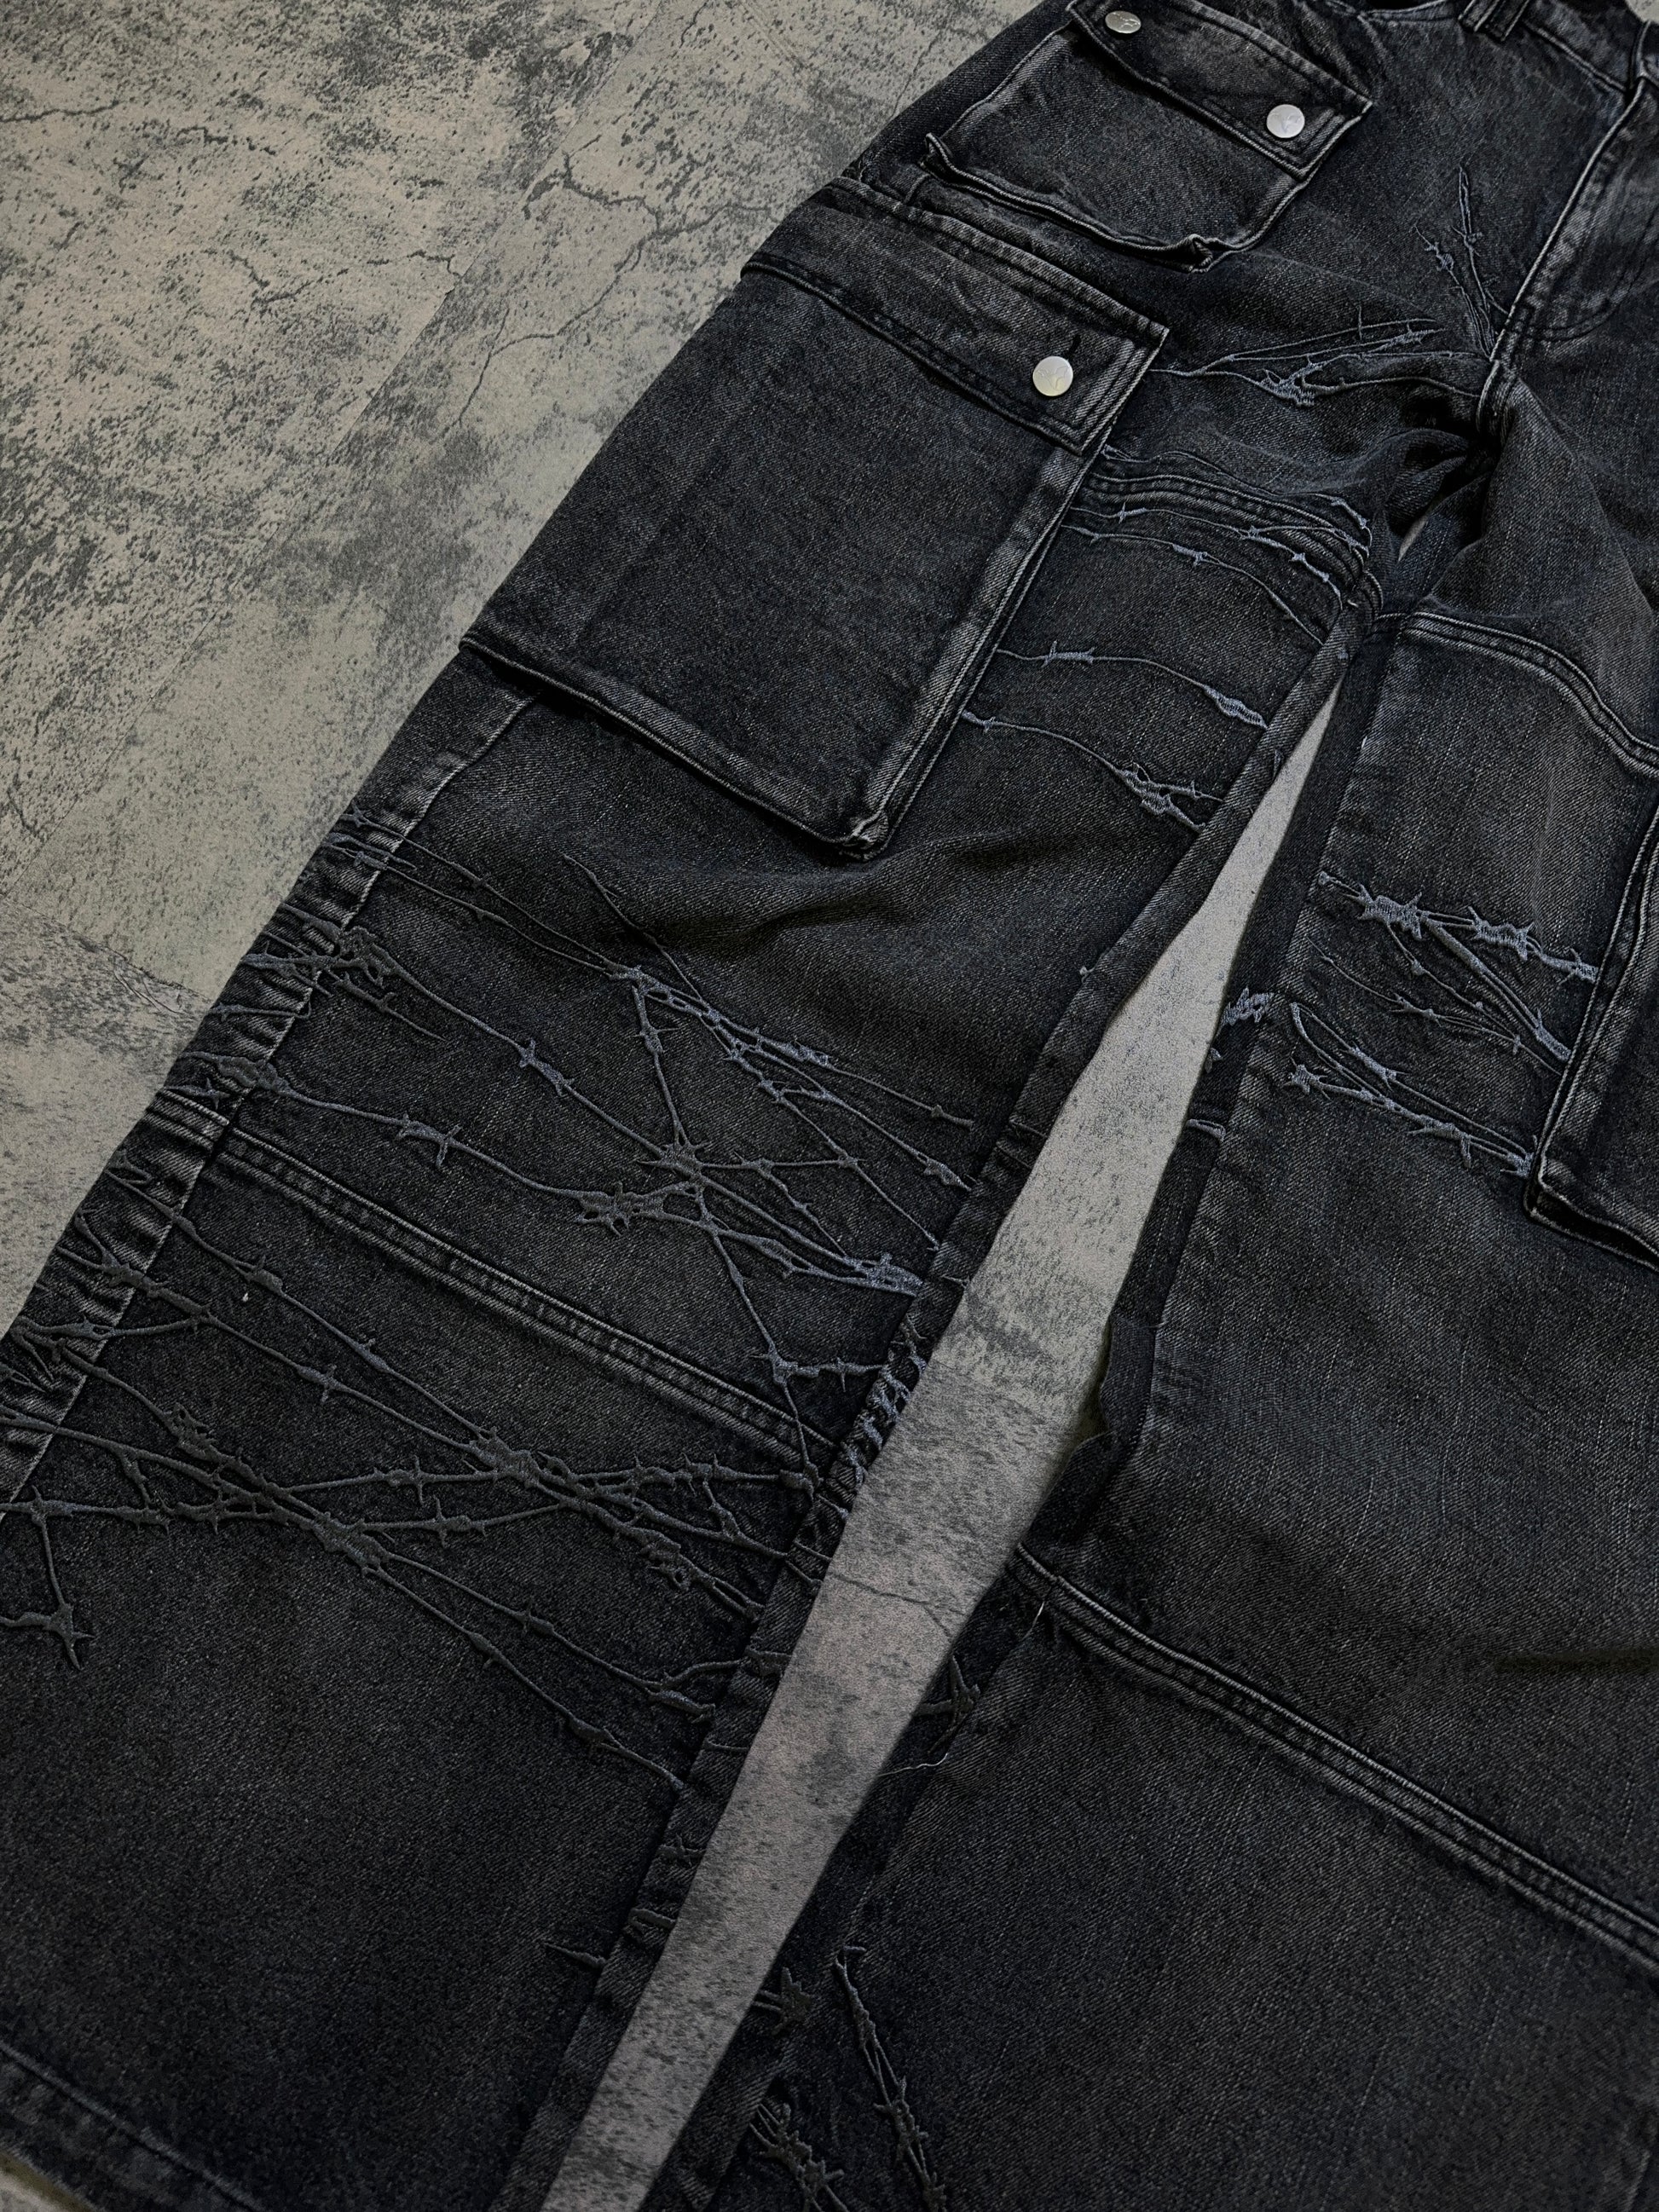 BARBED WIRE CARGOS (COAL) – ditch